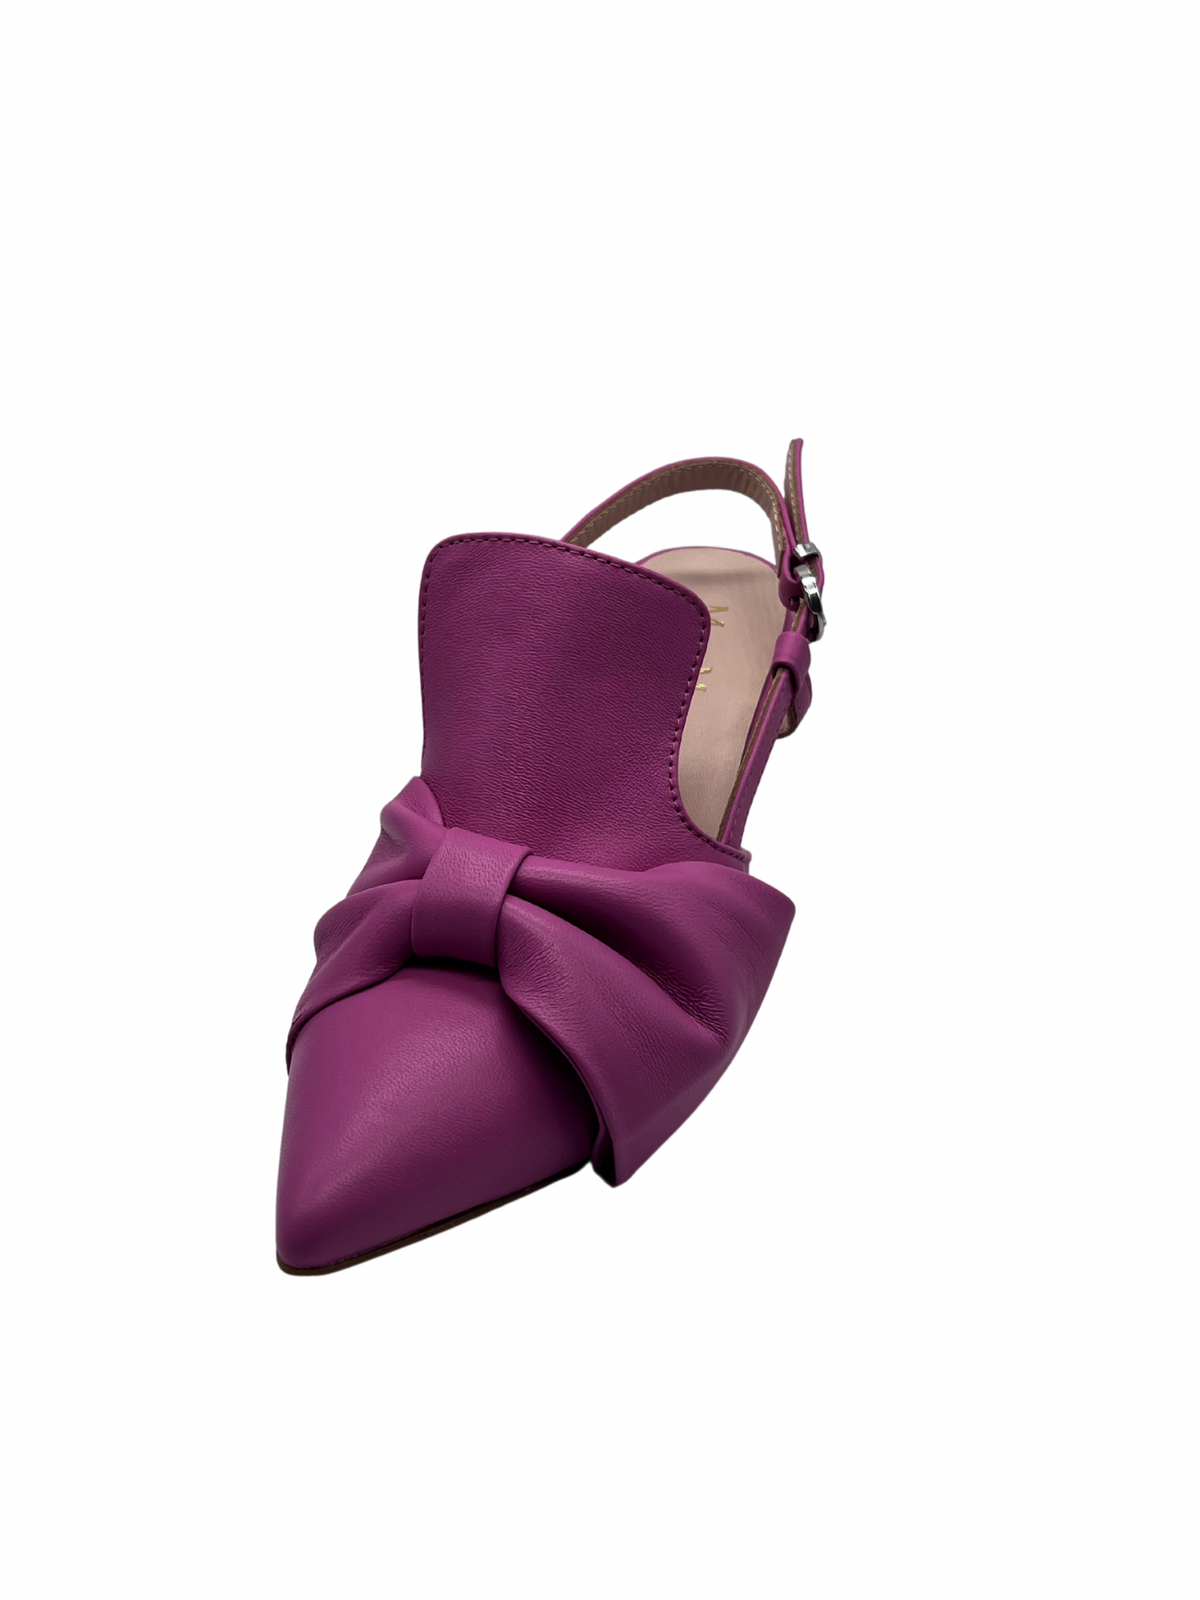 Marco Moreo Leather Pink Low Heel With Bow Detail